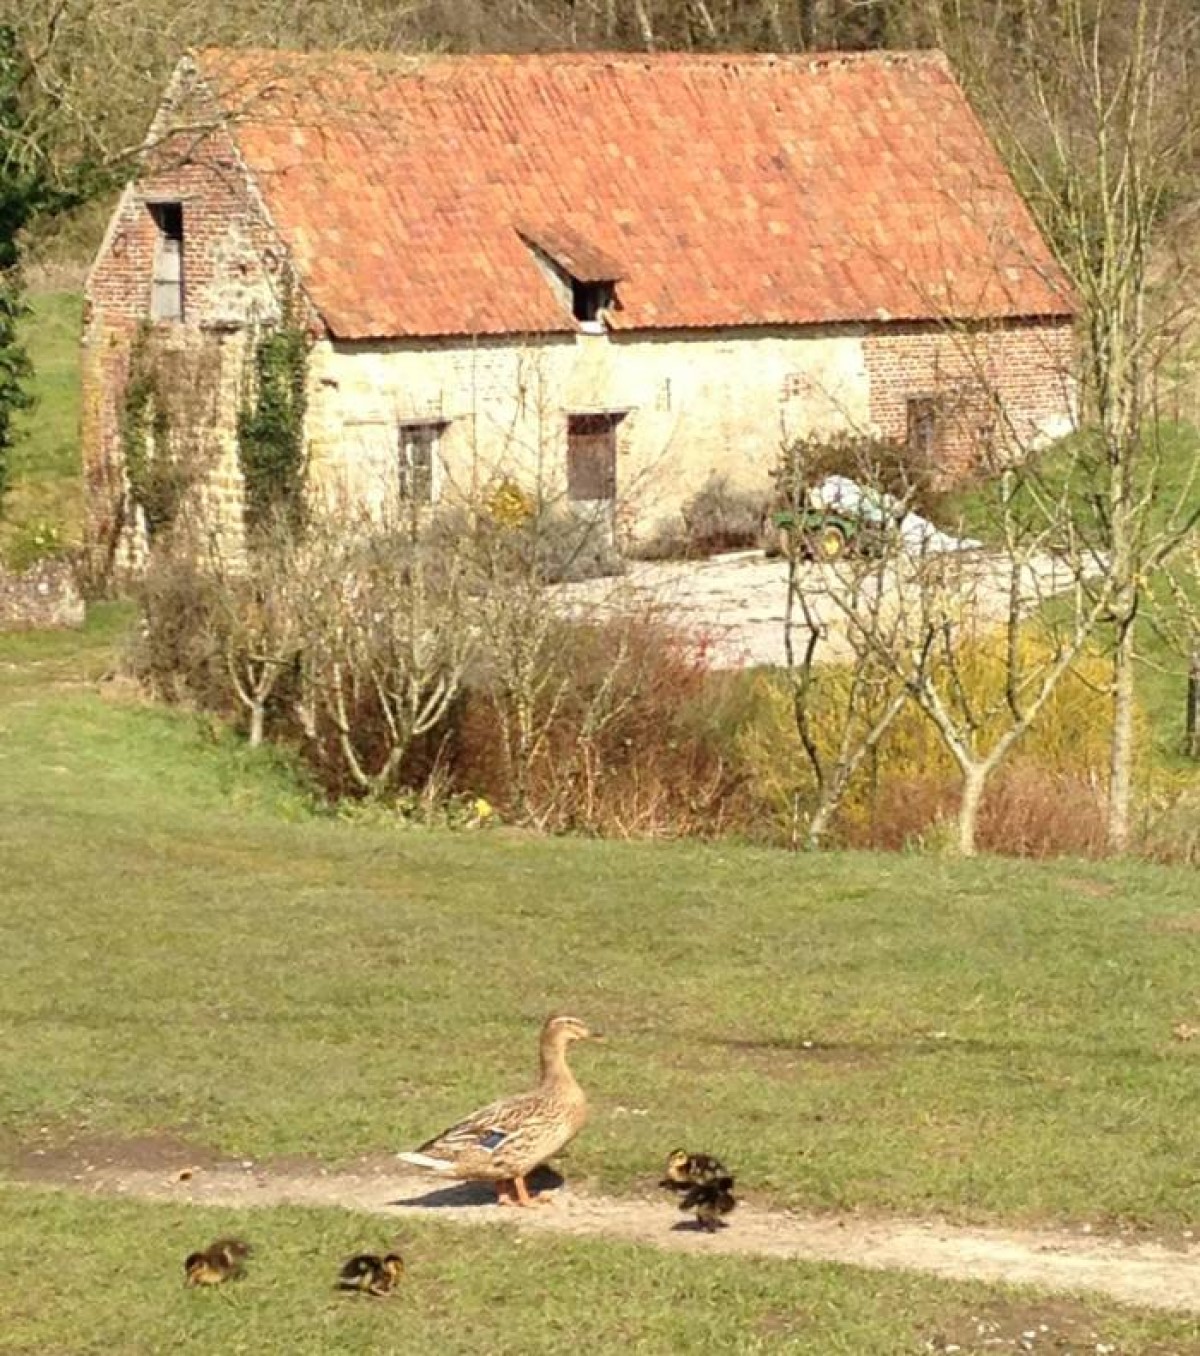 Ducklings and Moulin